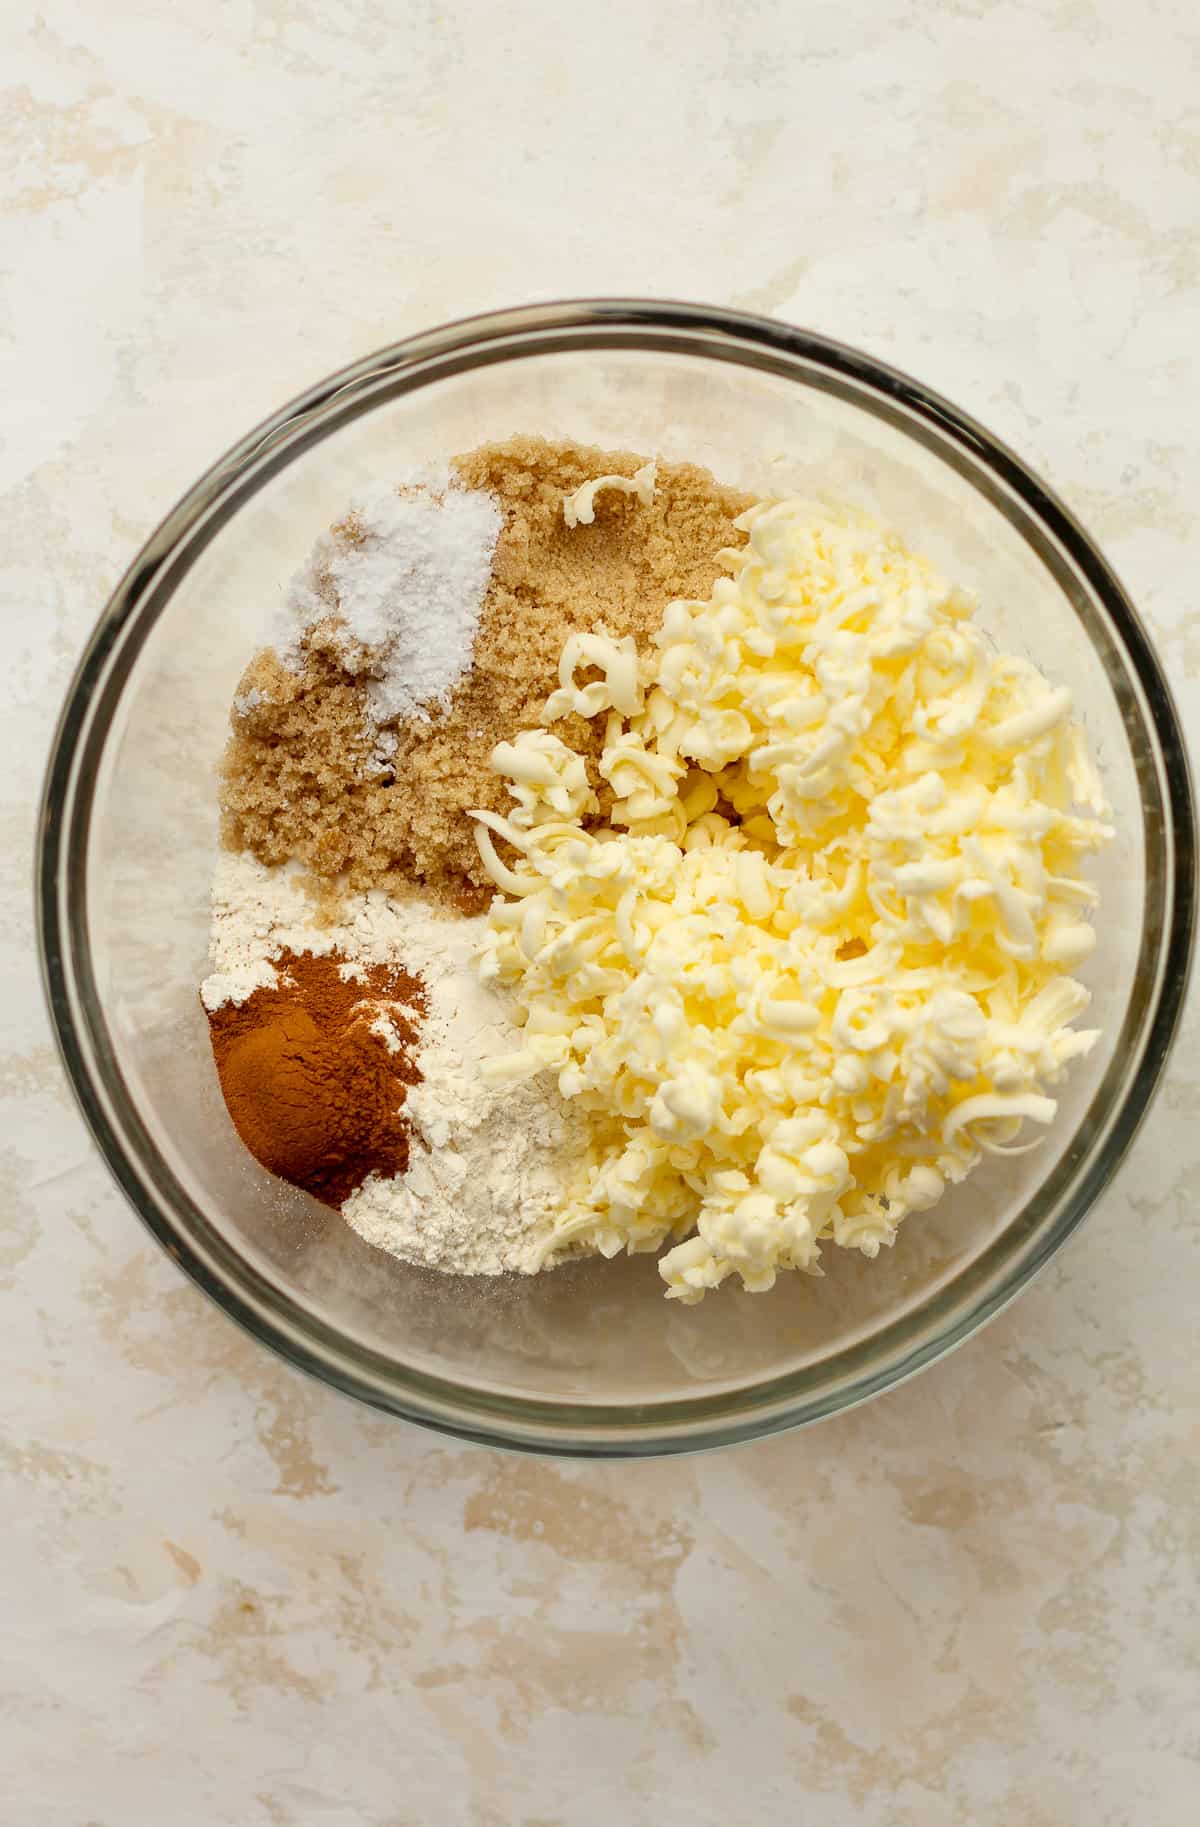 A bowl of the crumble topping ingredients.